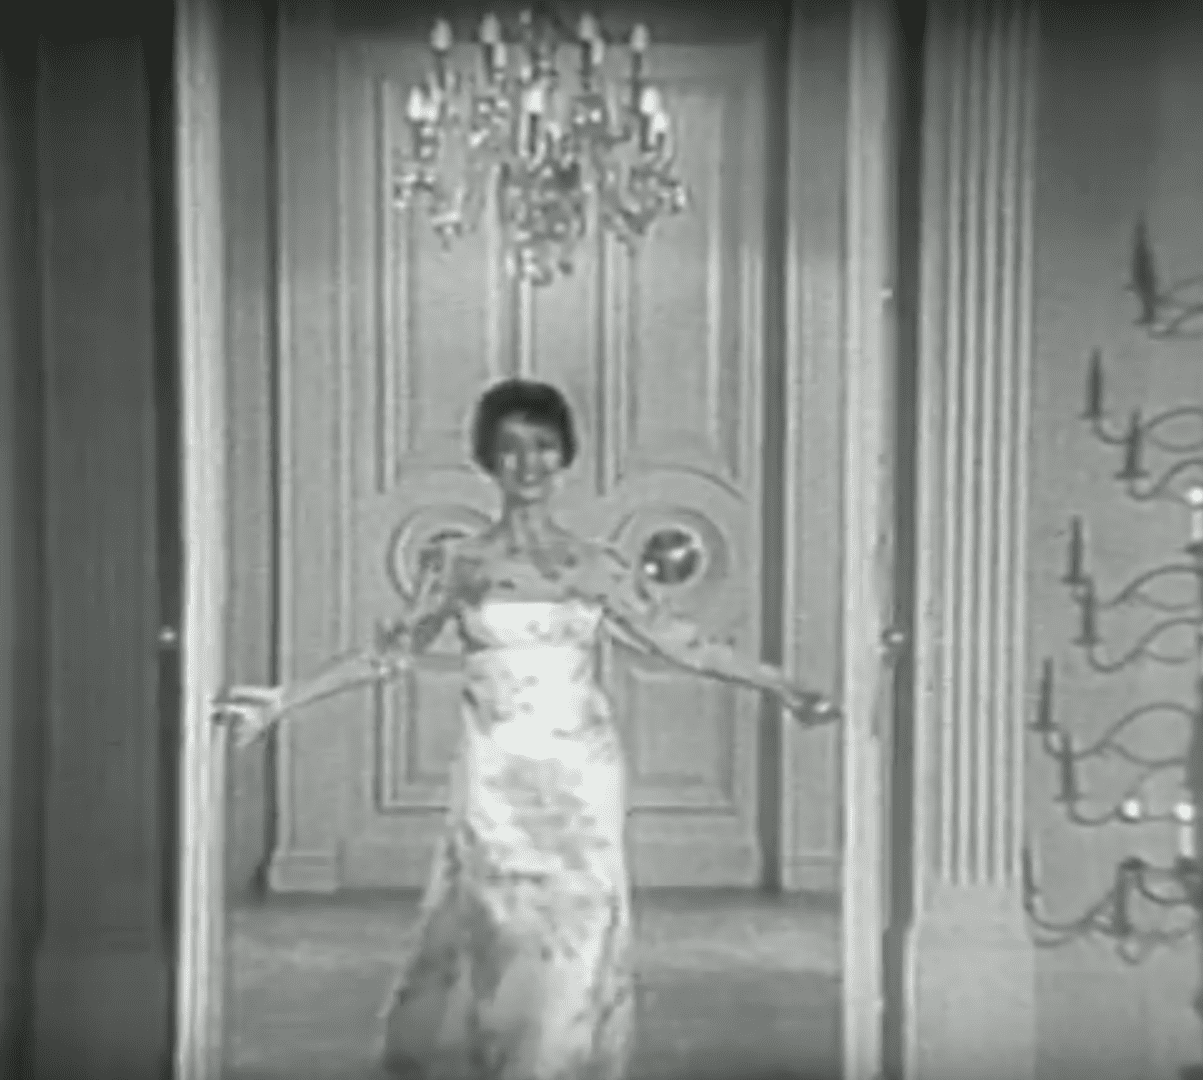 A woman in a white dress is standing by some doors